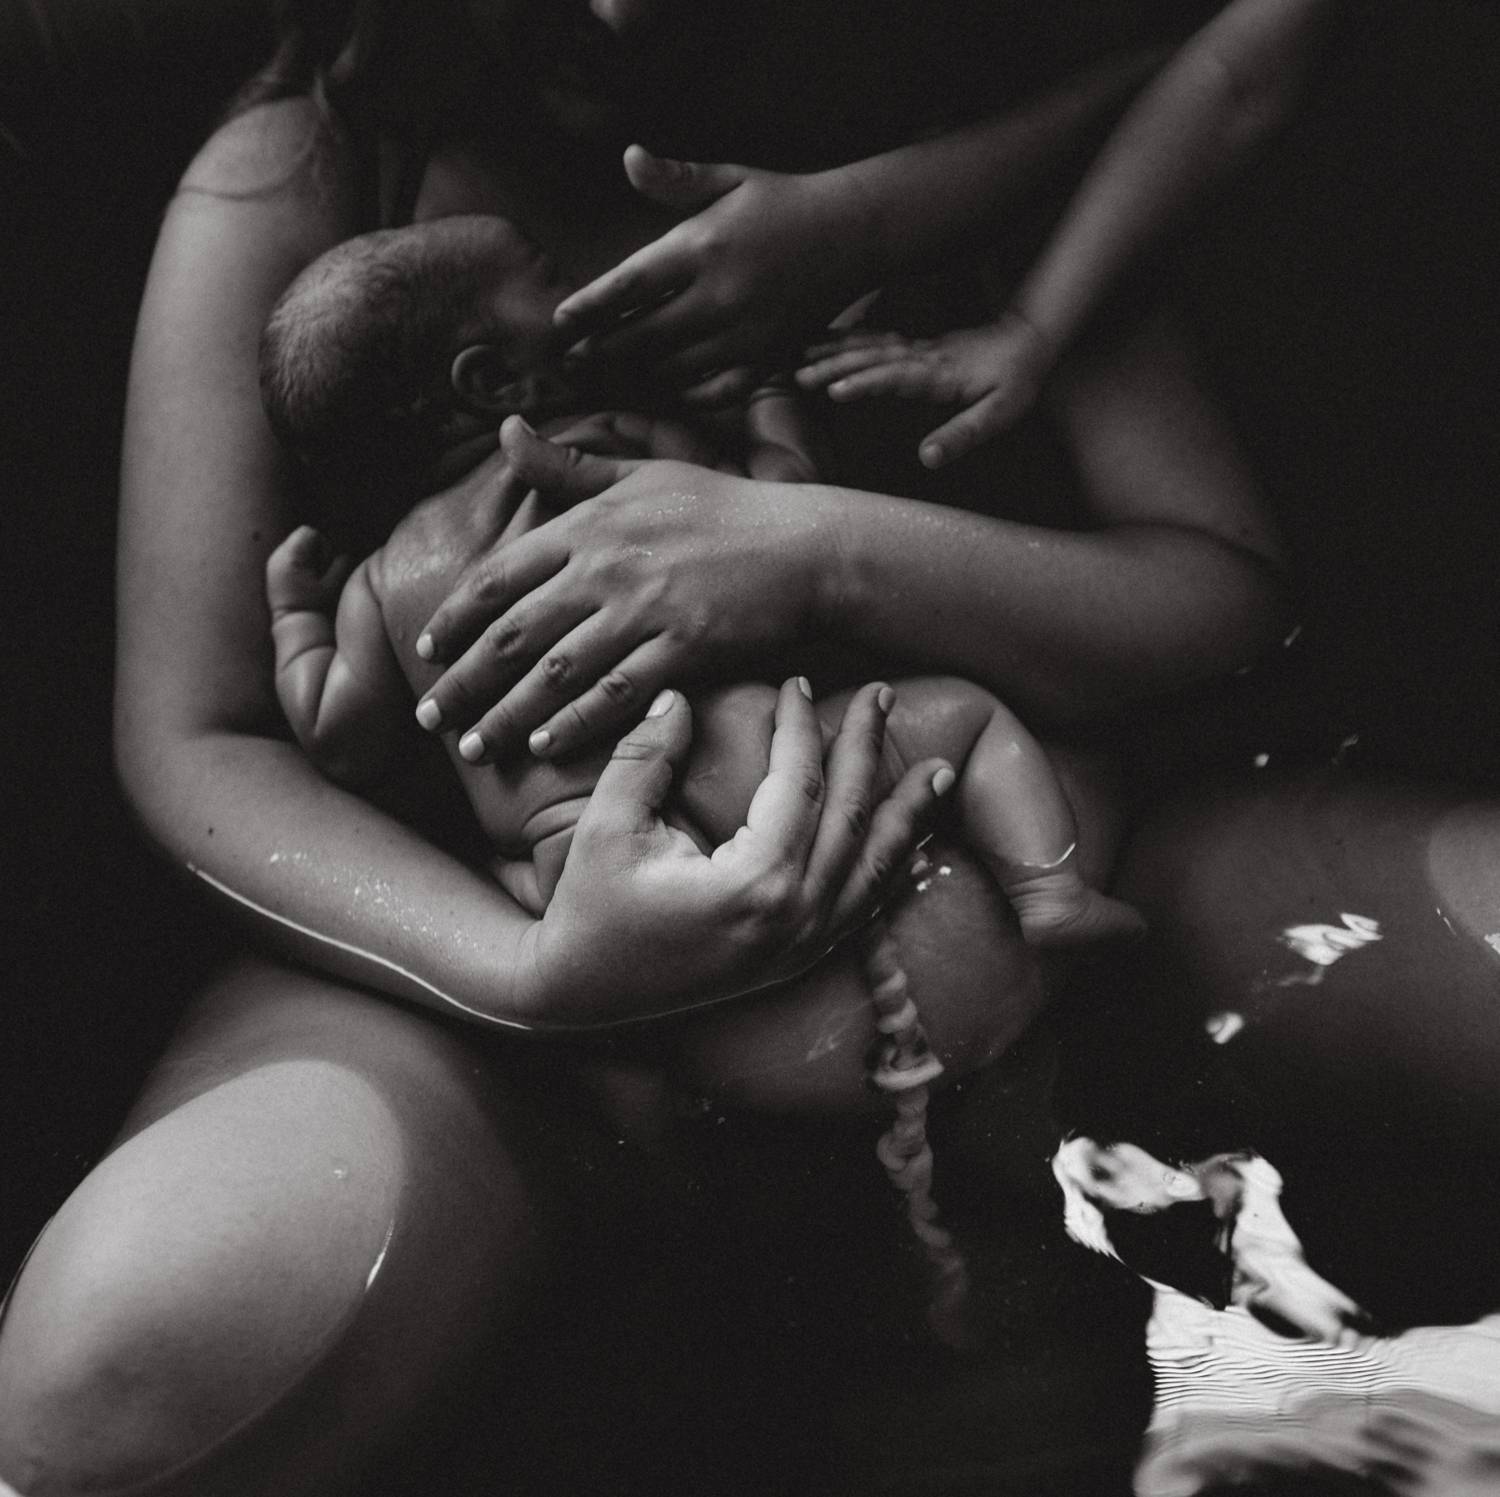 A new mother clutches her newborn baby to her chest as she rests in a tub of water